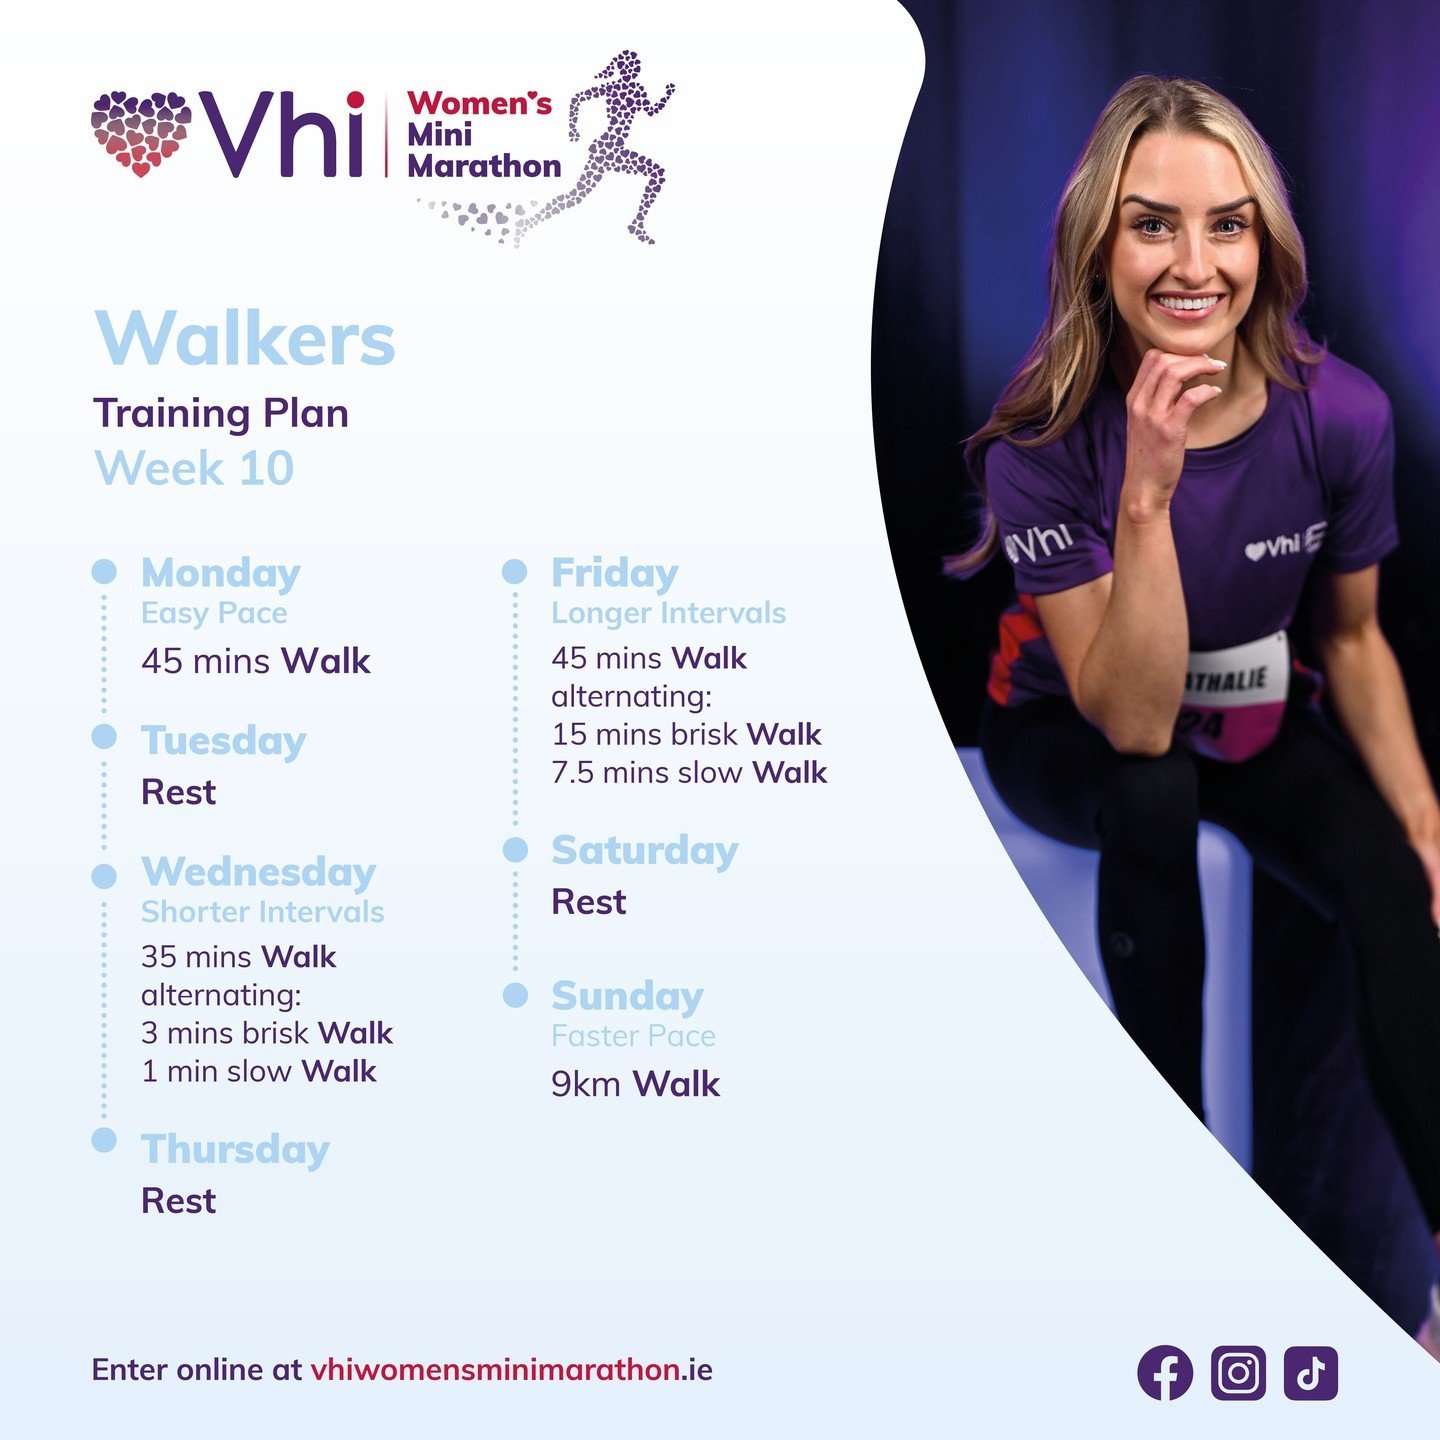 Week 10 of @vhi_ie training ambassador, @nathalielennon_ training plan is here, and race day is just within reach!

What aspect of the #WMM are you most looking forward to? 

#VhiWMM #VhiWomensMiniMarathon #FridayFitness #10km